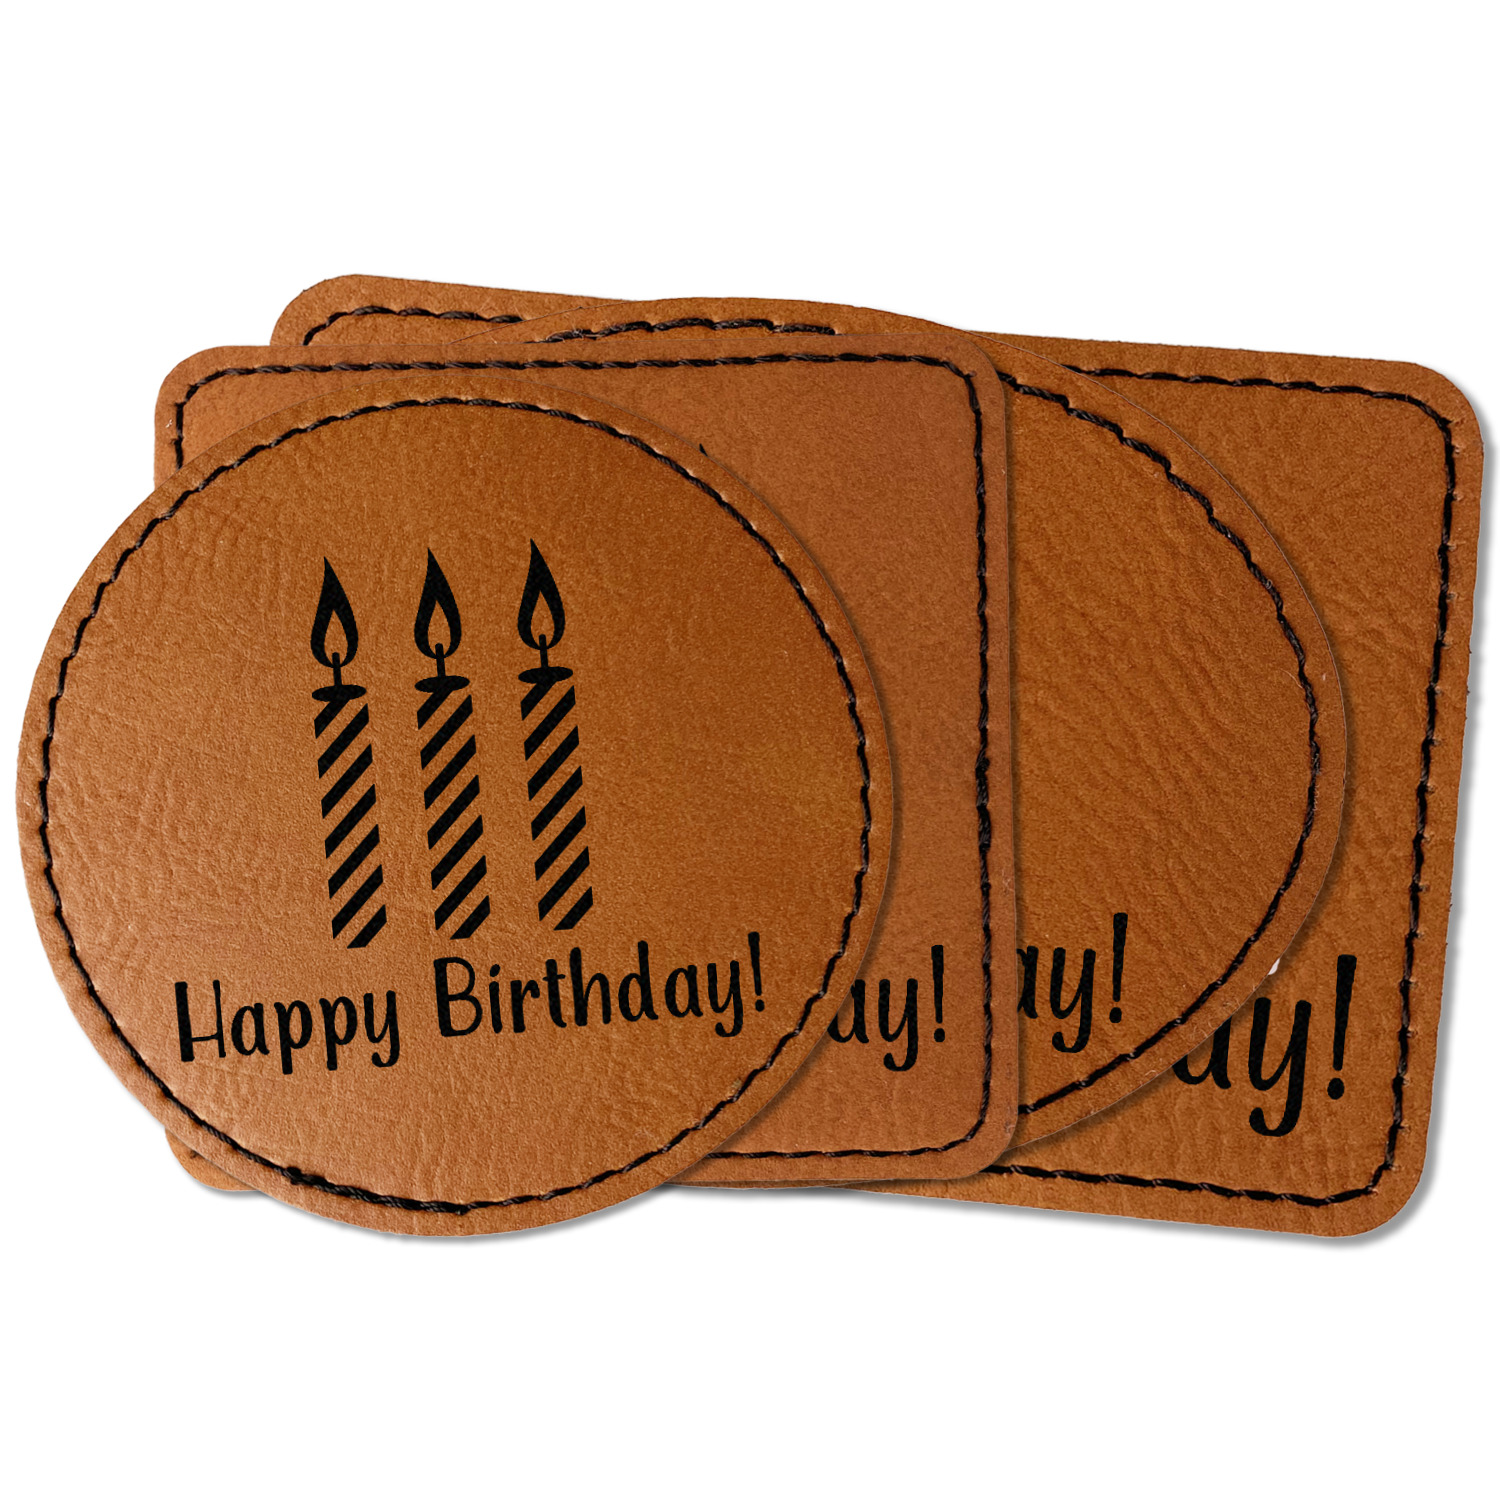 Iron On Name Patch, Birthday Gift Patch, Makeup bag Patch